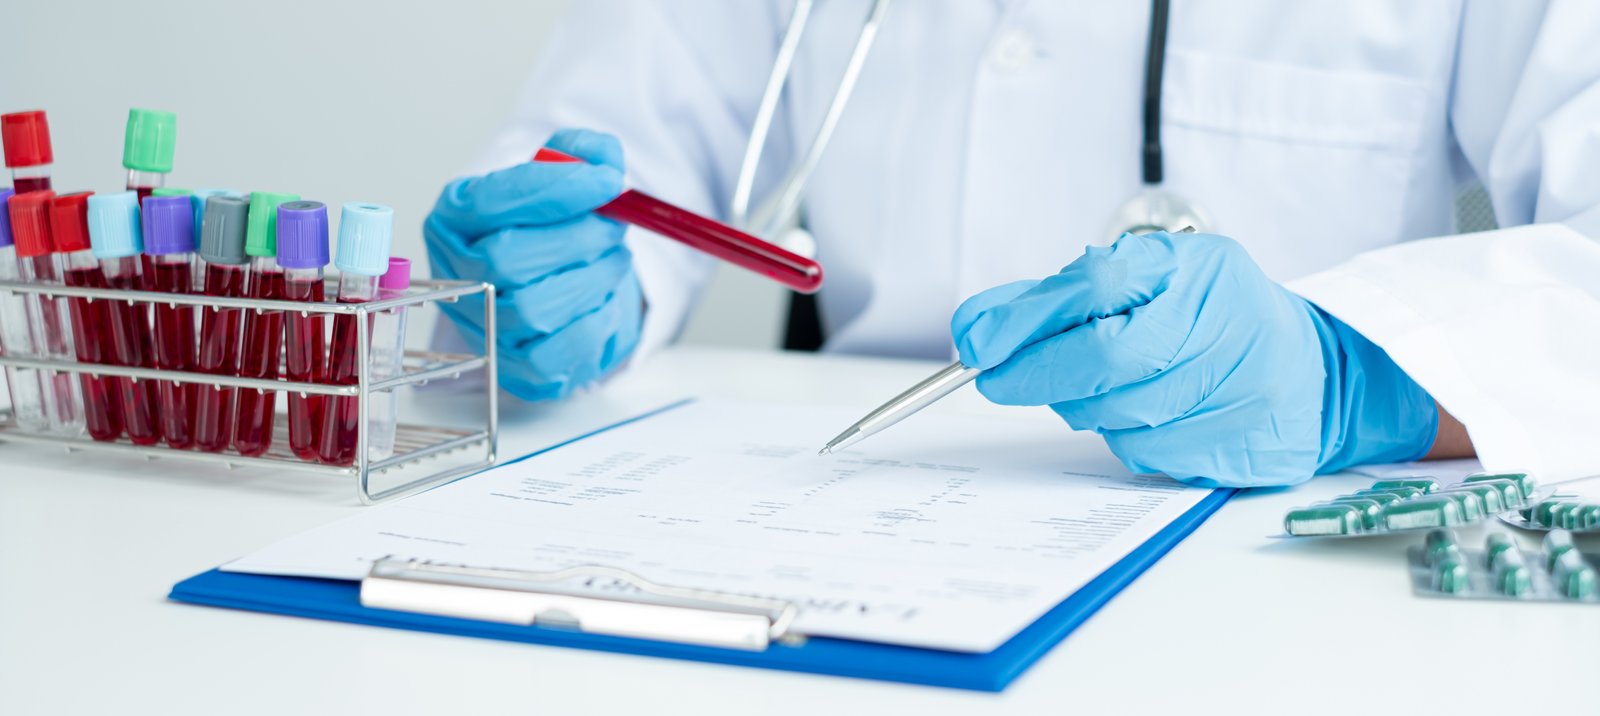 Professional doctors perform tests from samples of blood tests to diagnose virus infections analysis